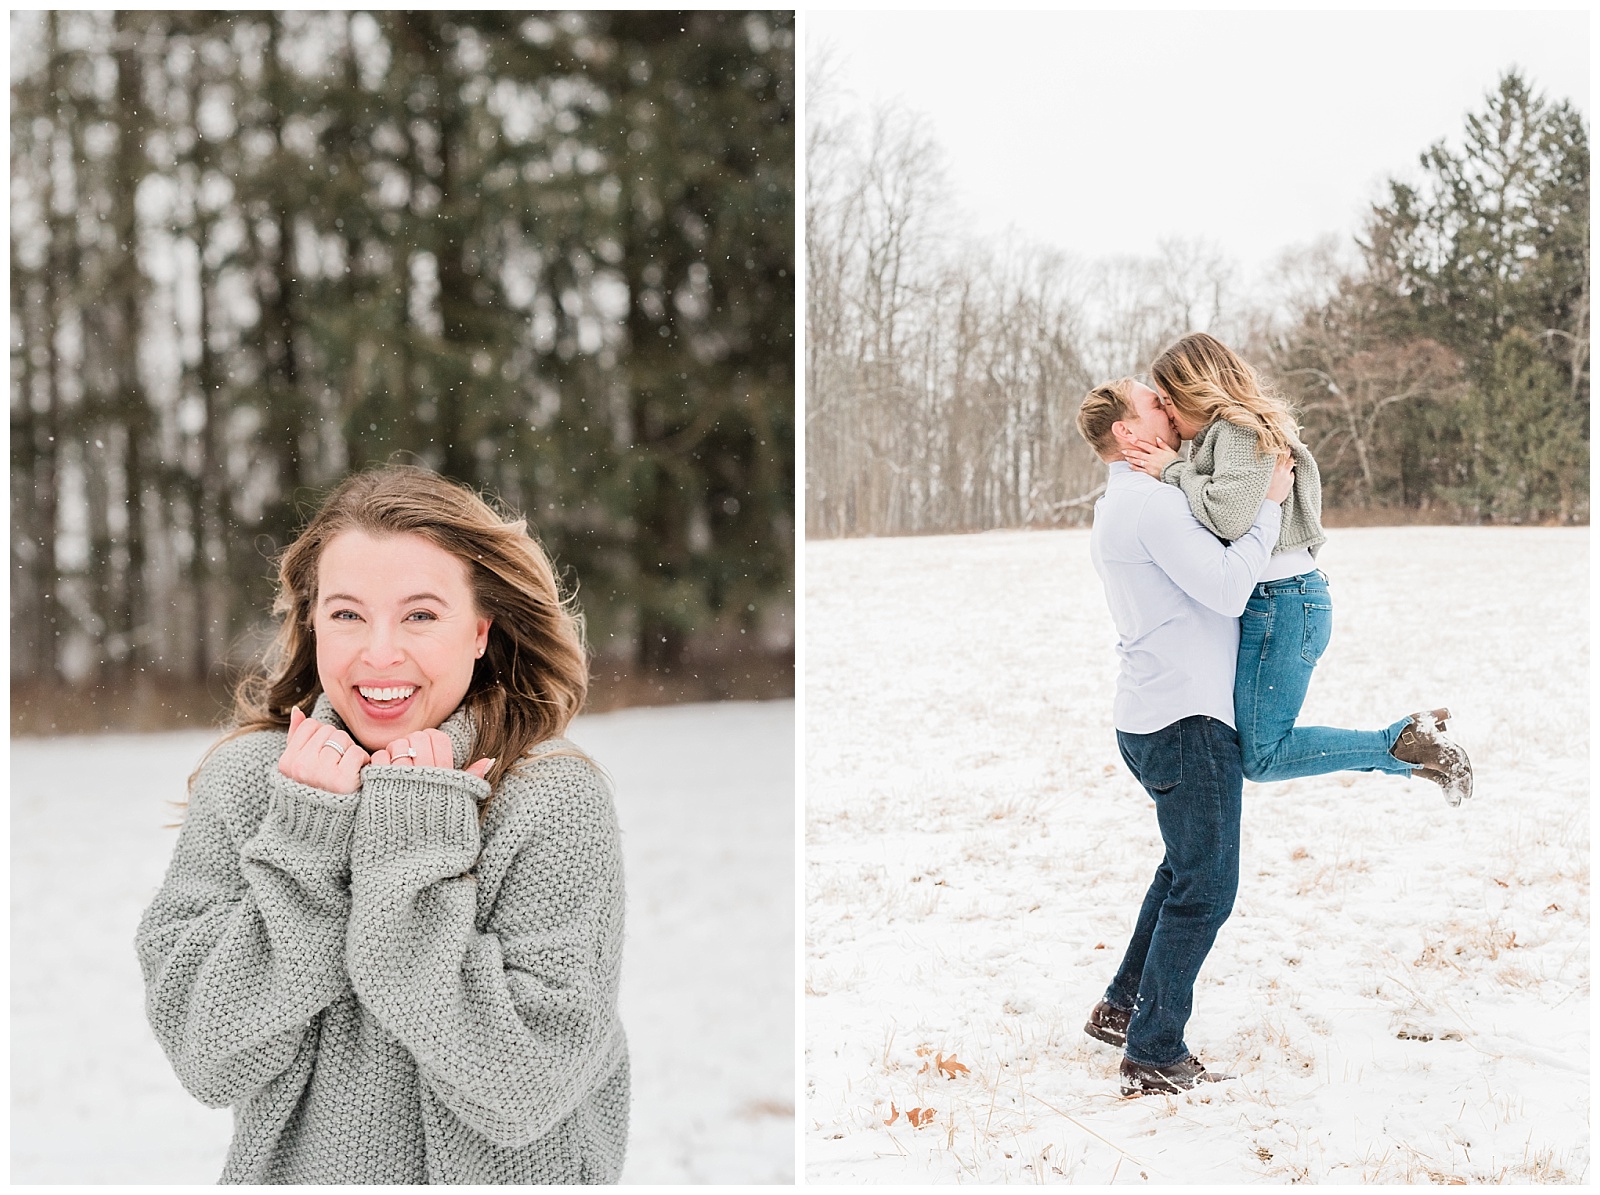 New Jersey Engagement Session, Snowy, Winter, Cozy, Session, Wedding Photographer, Cross Estate Gardens, Snow, Wintry, Light and Airy, Love